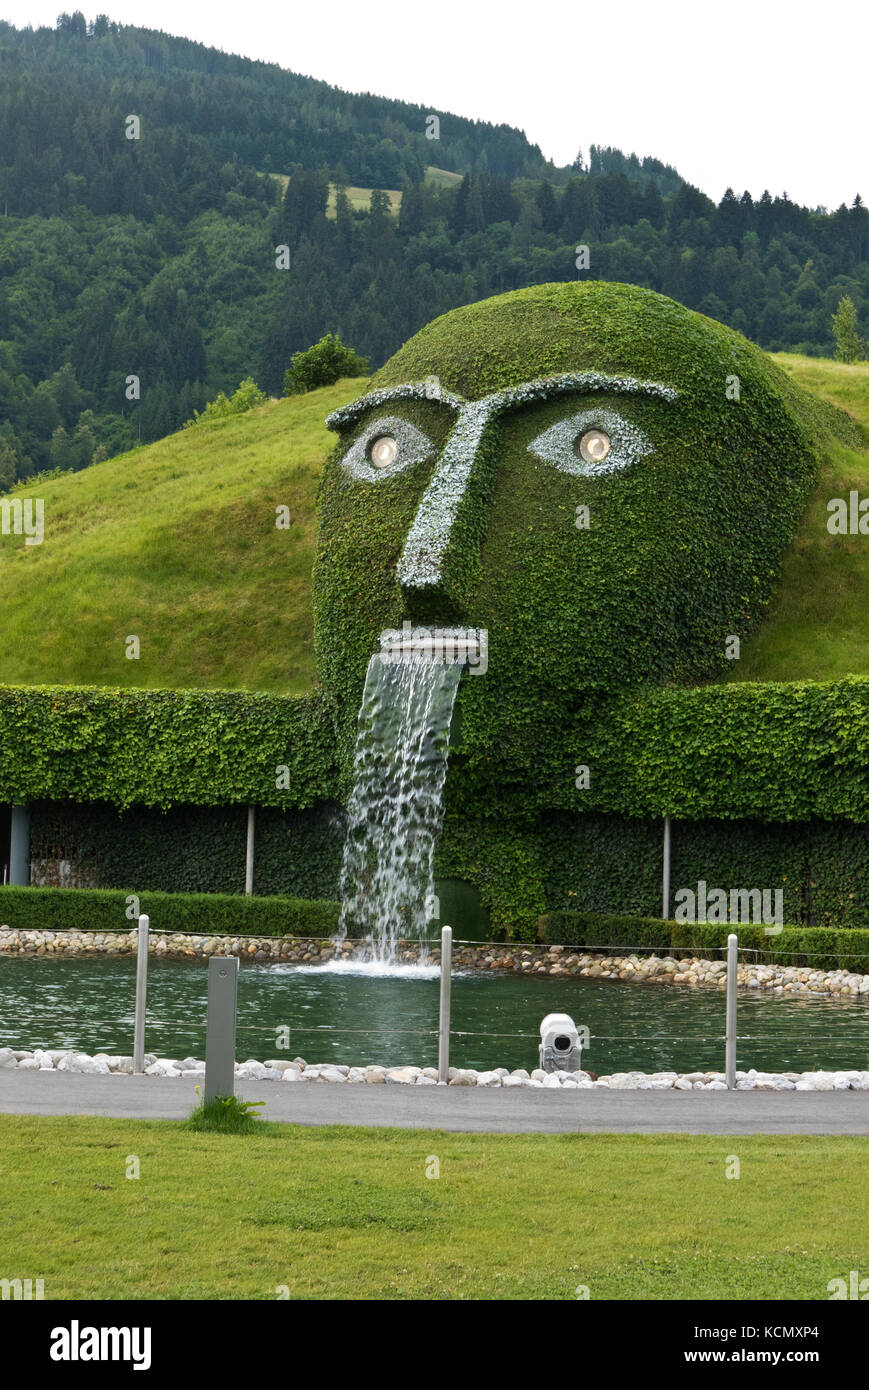 The Giant face at the entrance to the Swarovski Crystal Worlds, Wattens,  Austria Stock Photo - Alamy